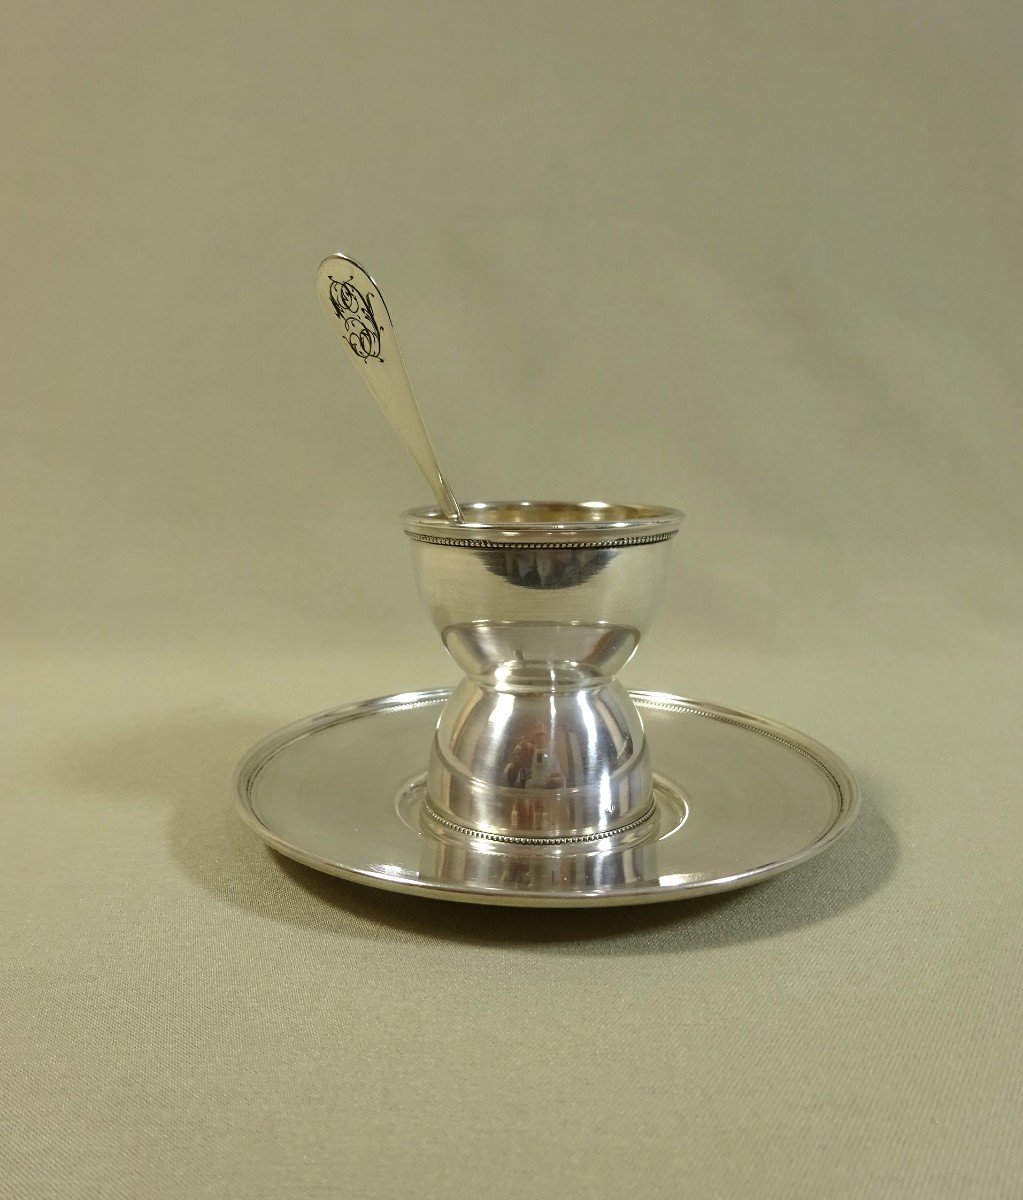 Egg Cup In Silver Minerva, Accompanied By Its Original Stick And Small Spoon.-photo-1